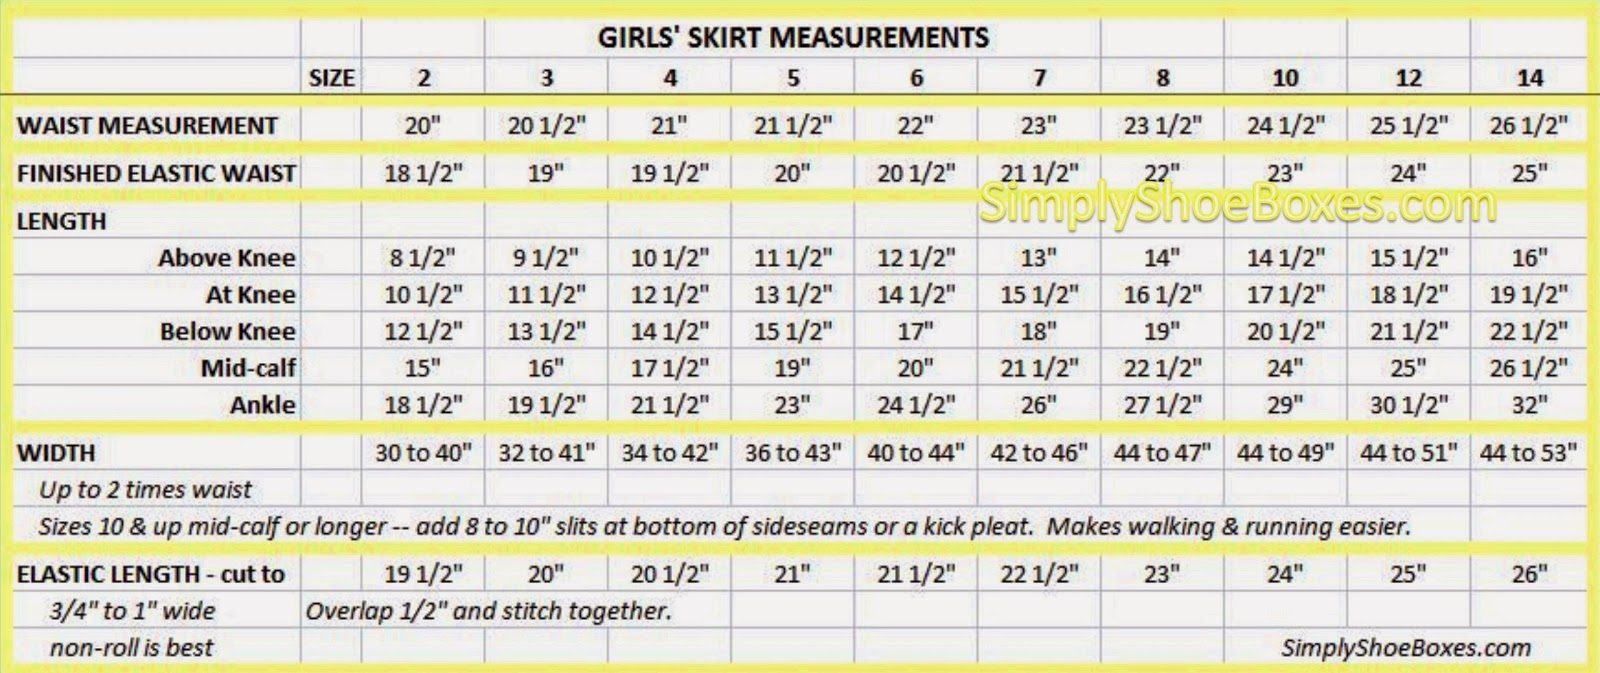 Simply Shoeboxes: Girl's Skirt Sizing Chart Sizes 2 to 14